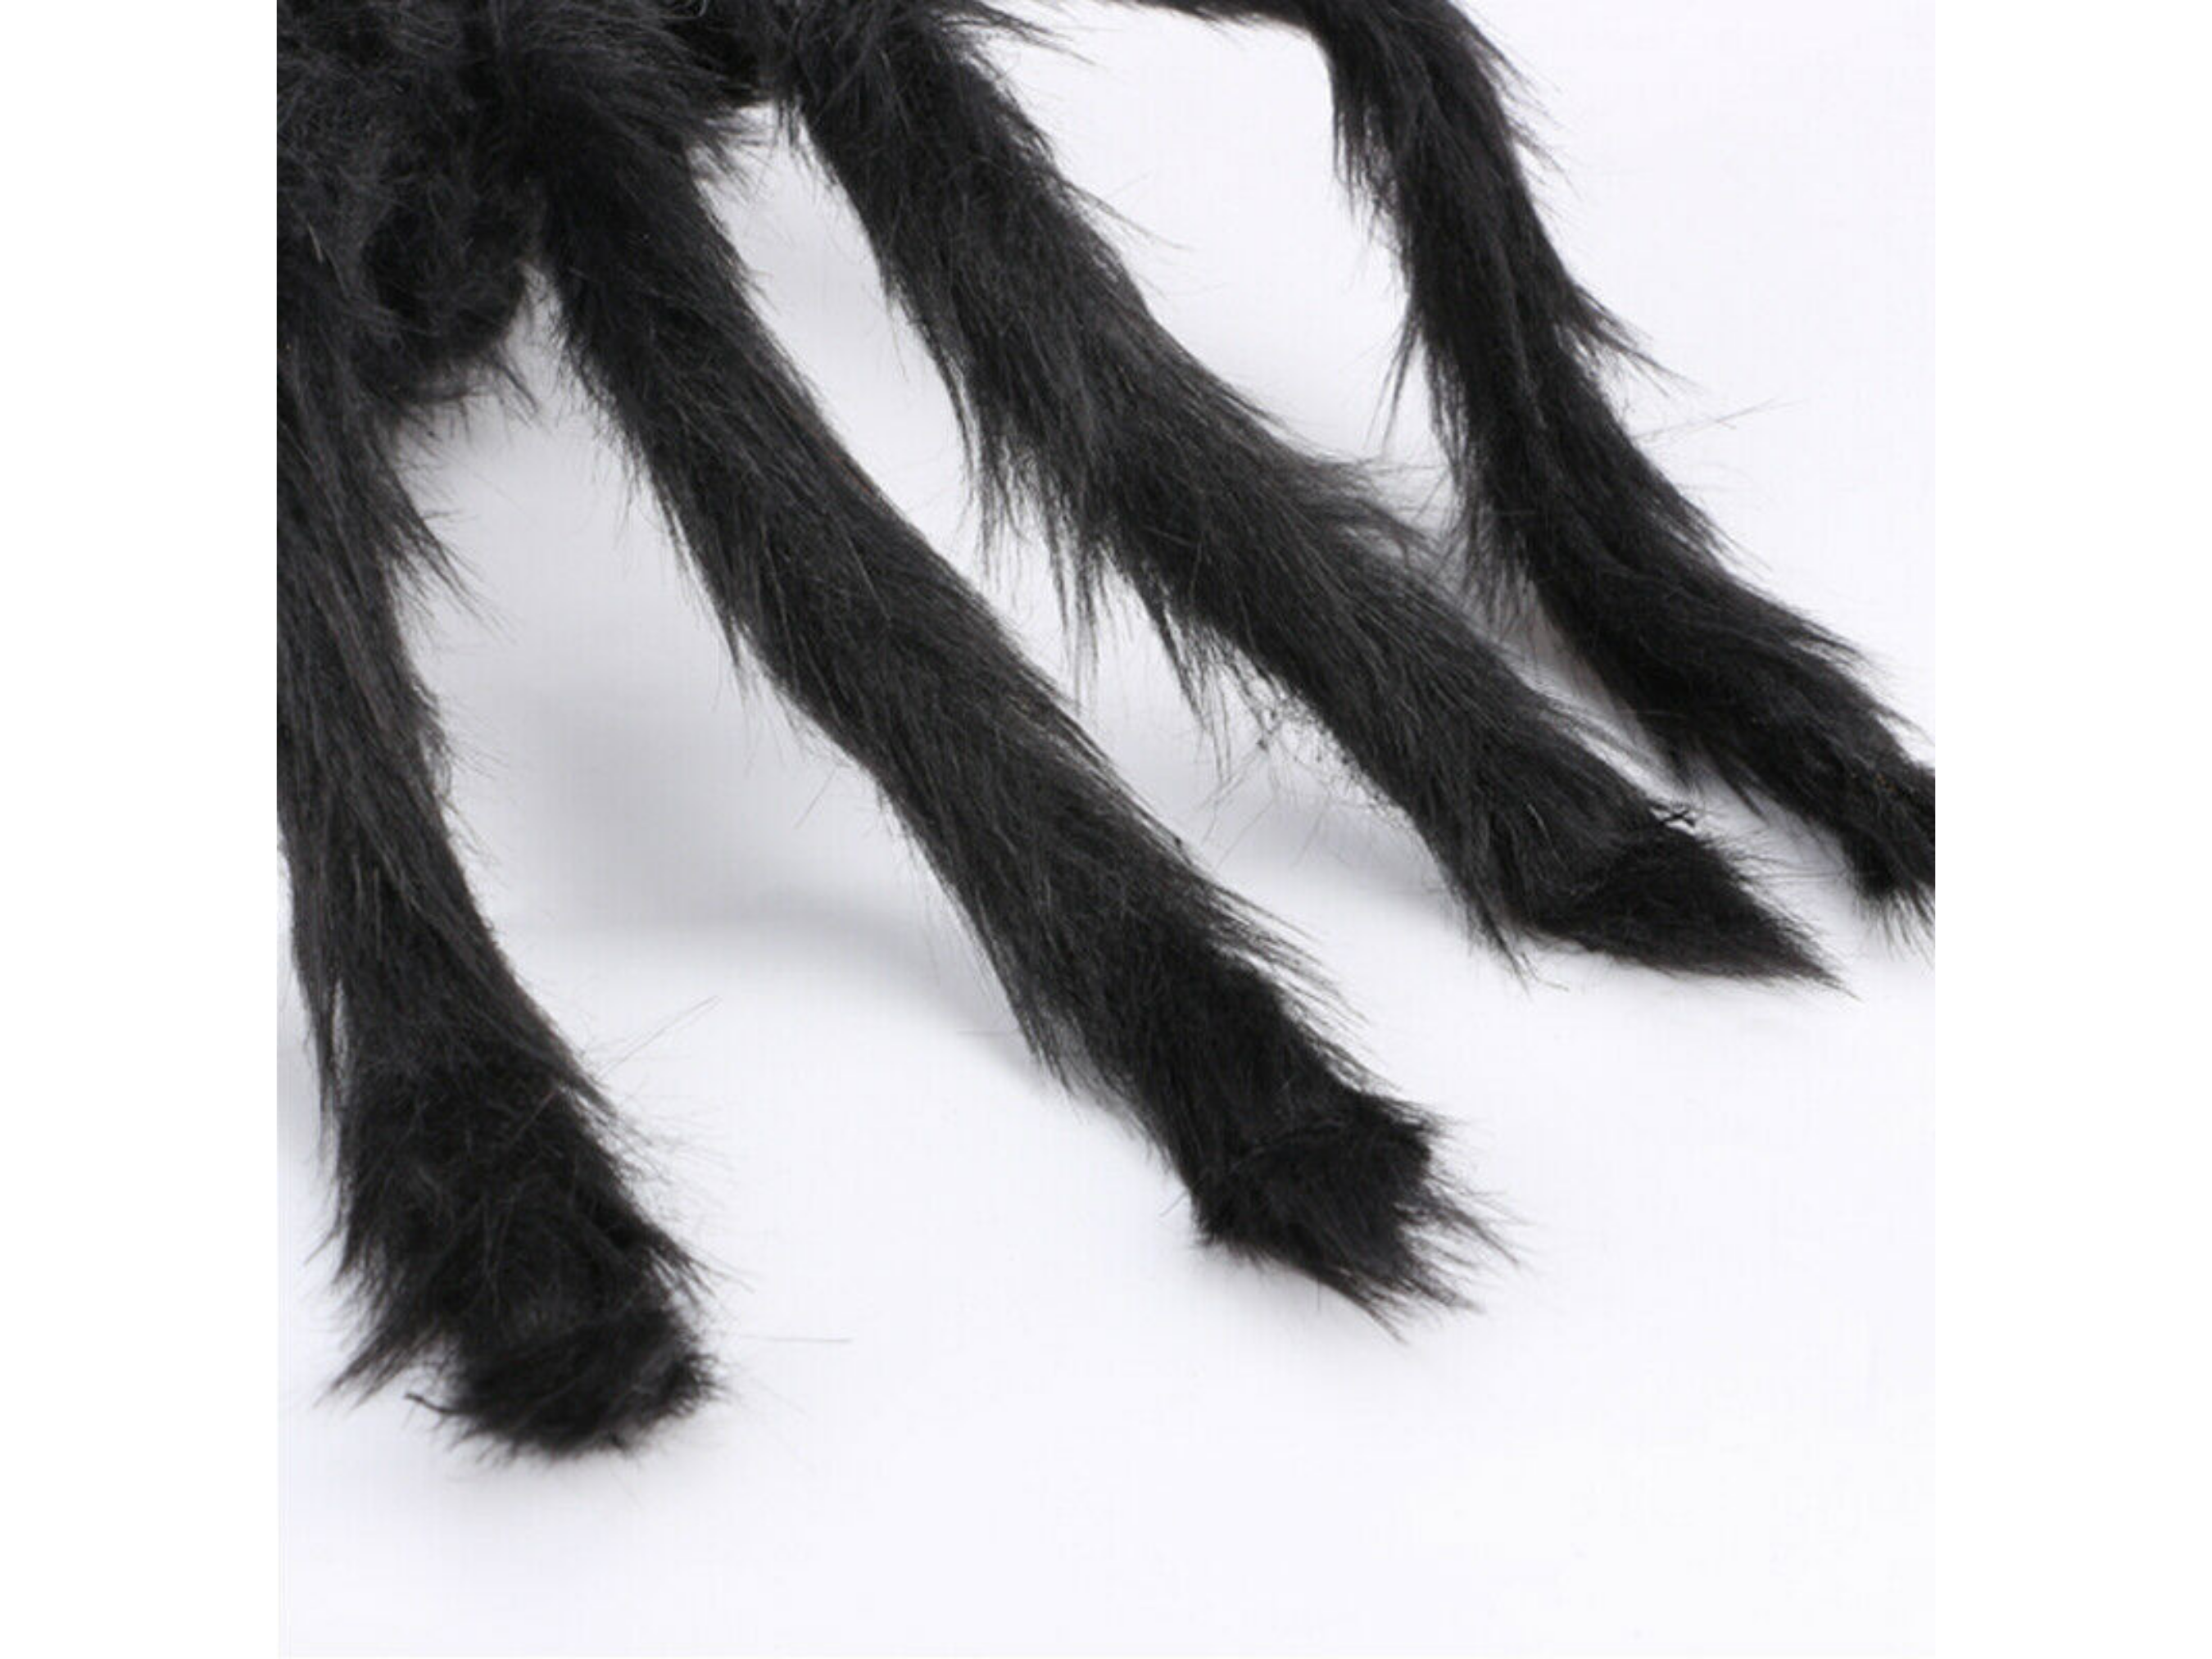 Spider Costume Dog Apparel Happy Paws Online 